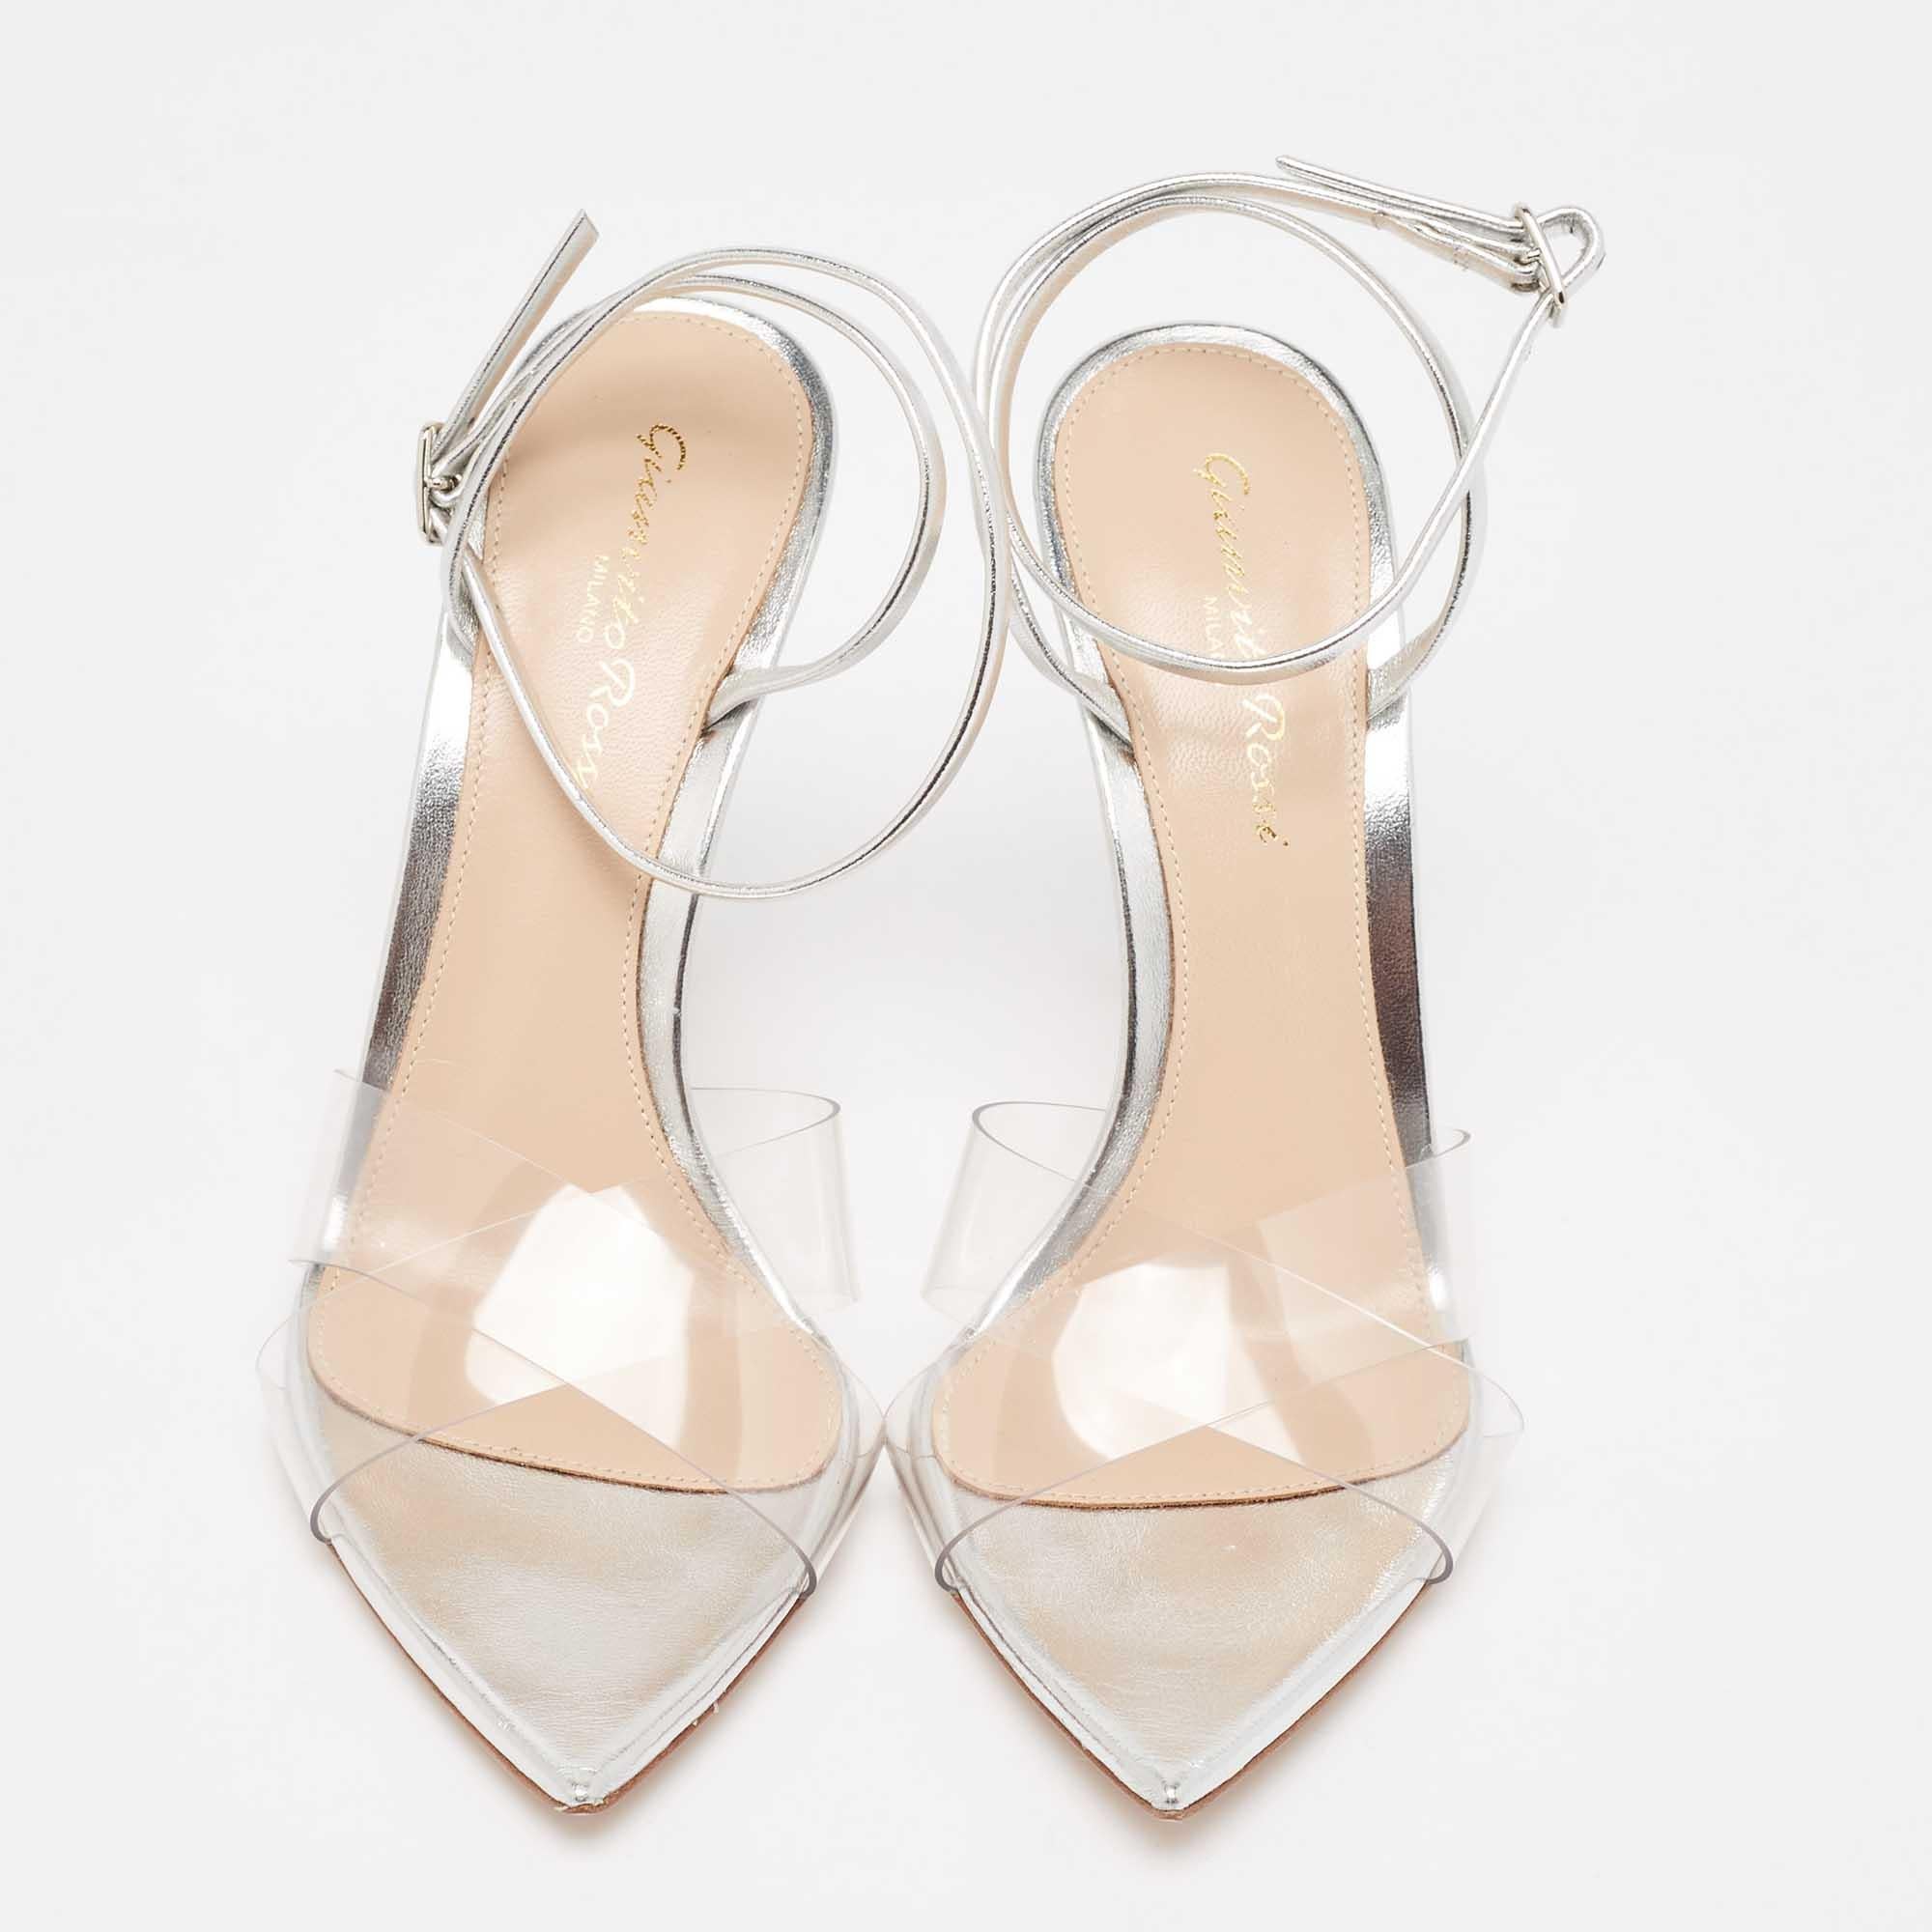 Resplendent and ravishing, these Plexi Stark sandals from the Italian shoe label Gianvito Rossi are here to make you fall in love with them. Skillfully crafted from leather, they feature clear PVC crisscross straps that elegantly wrap the foot and